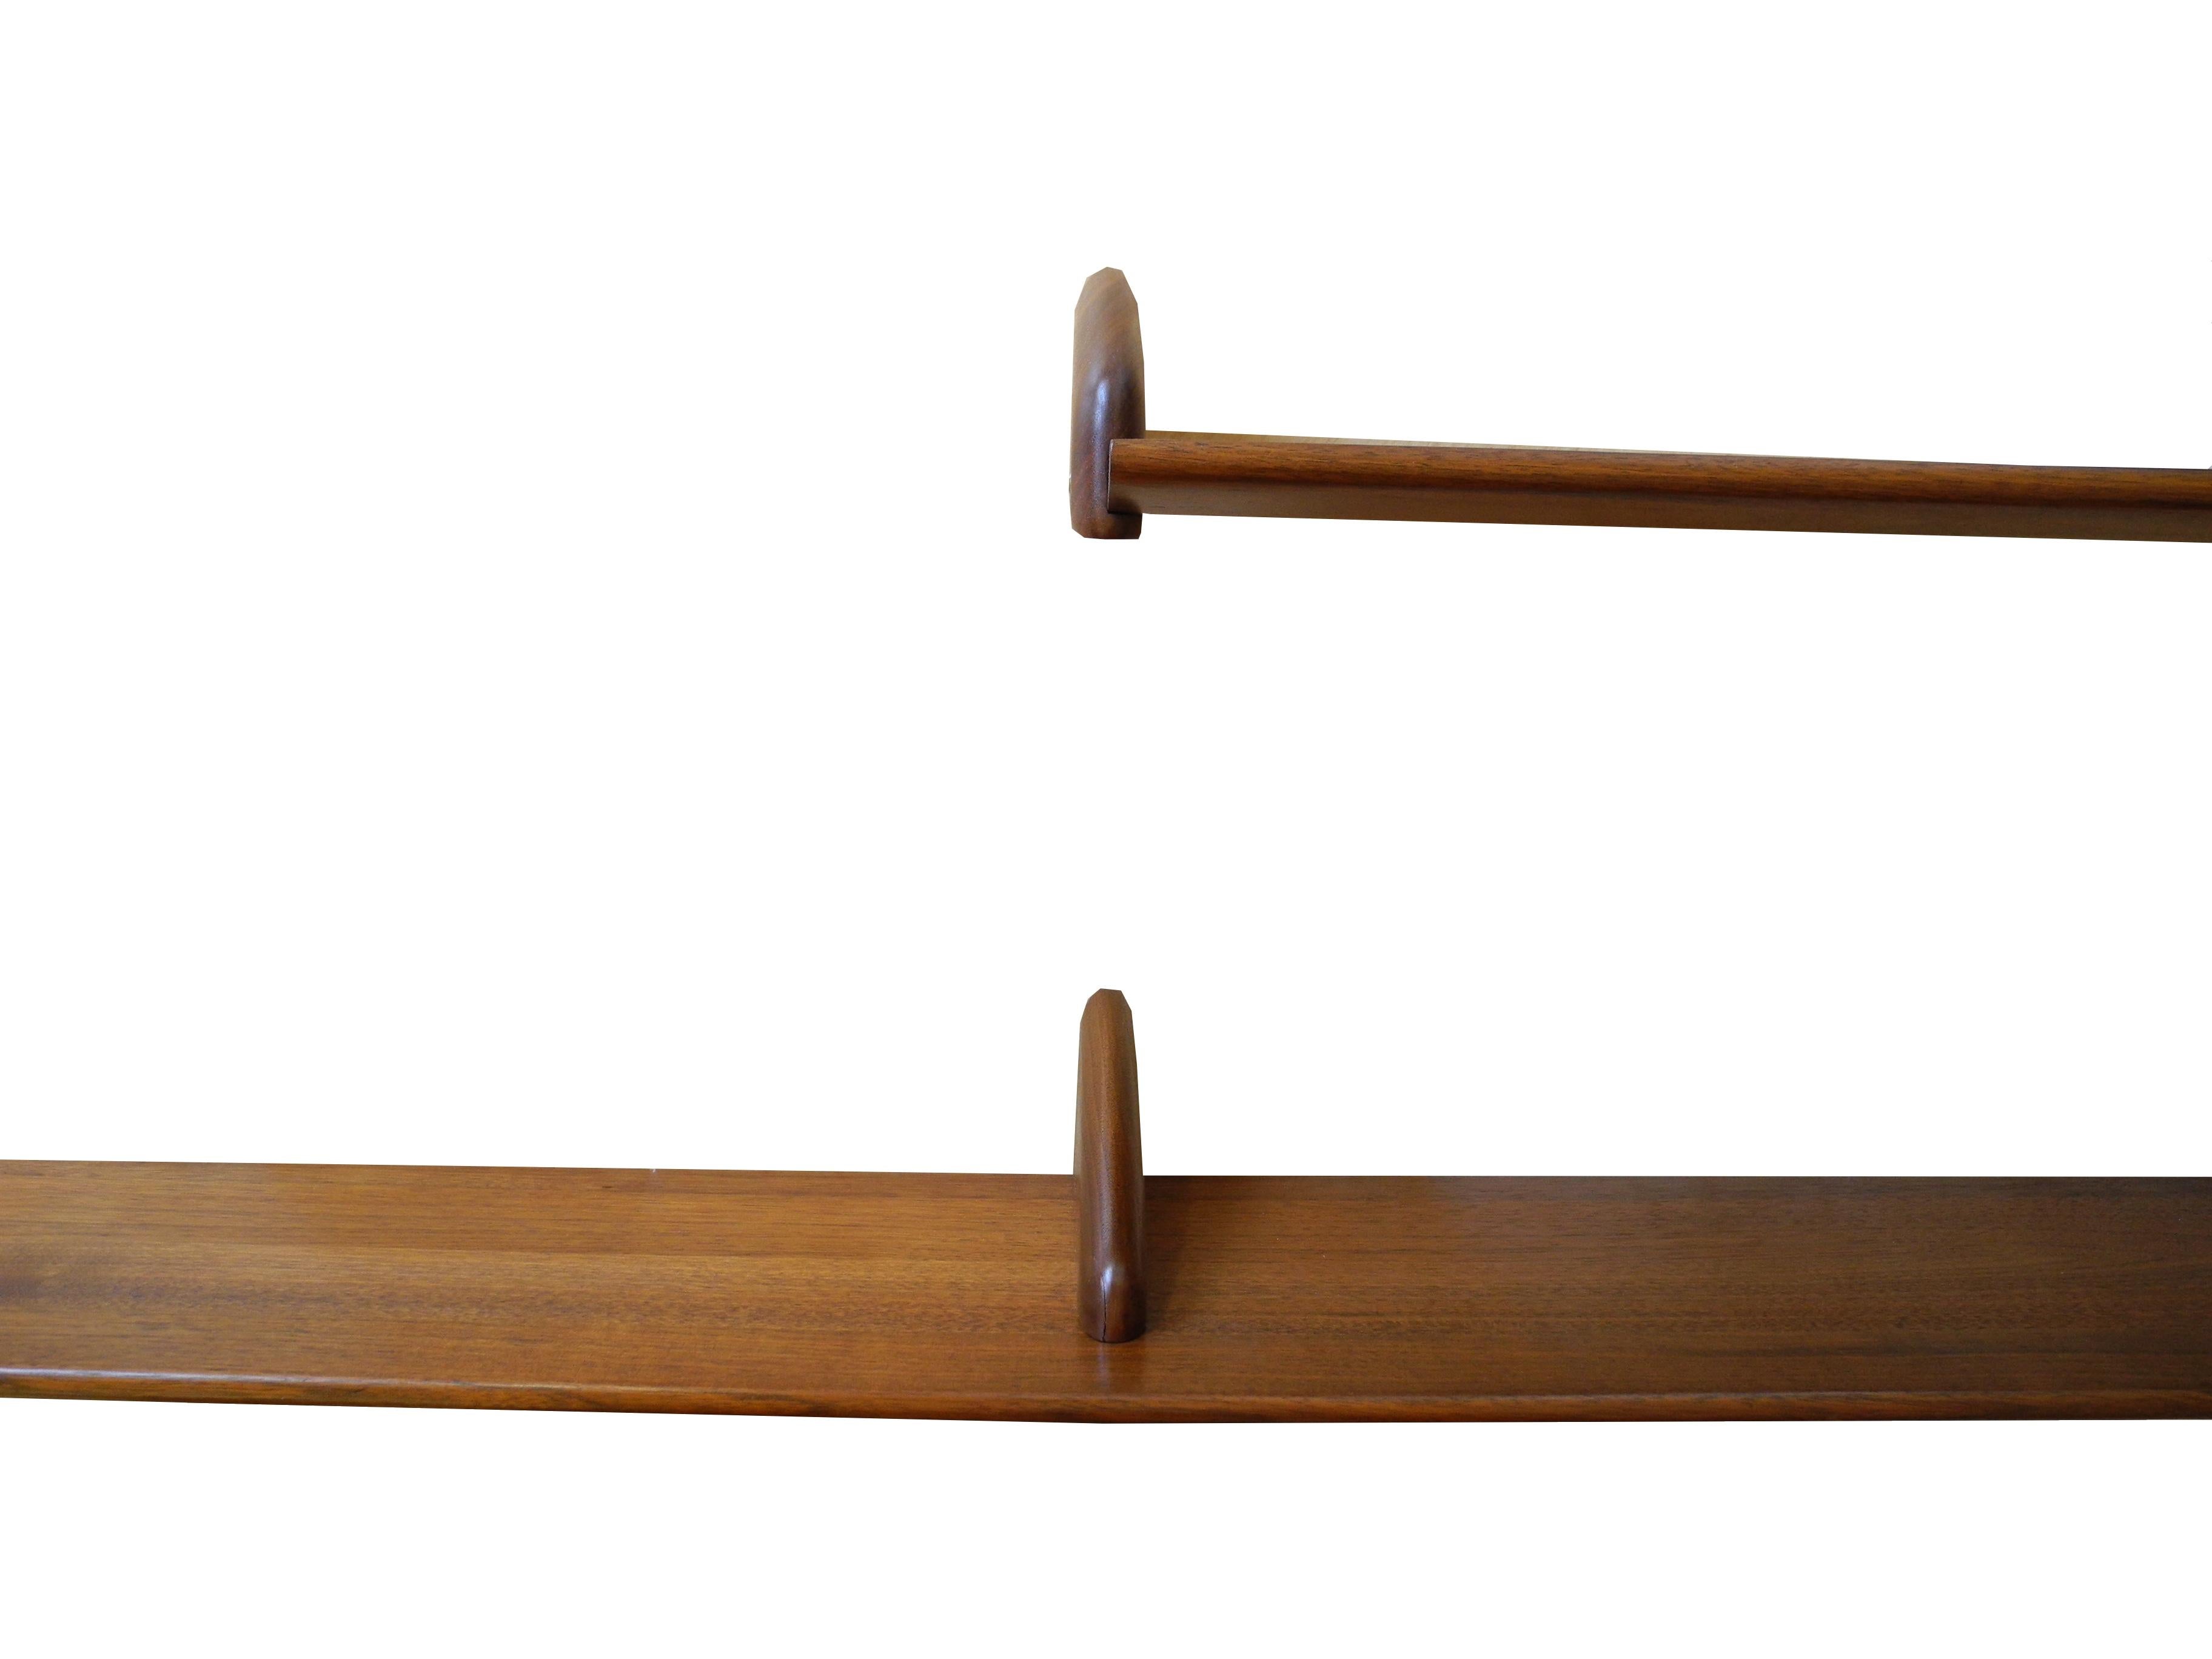 These refinished vintage walnut shelves measure 6 feet and 3 feet. Place and design anywhere on the wall. Each shelf has hidden hanging hardware on the back or wall side for a sleek floating look. Book ends are built into the design.
 